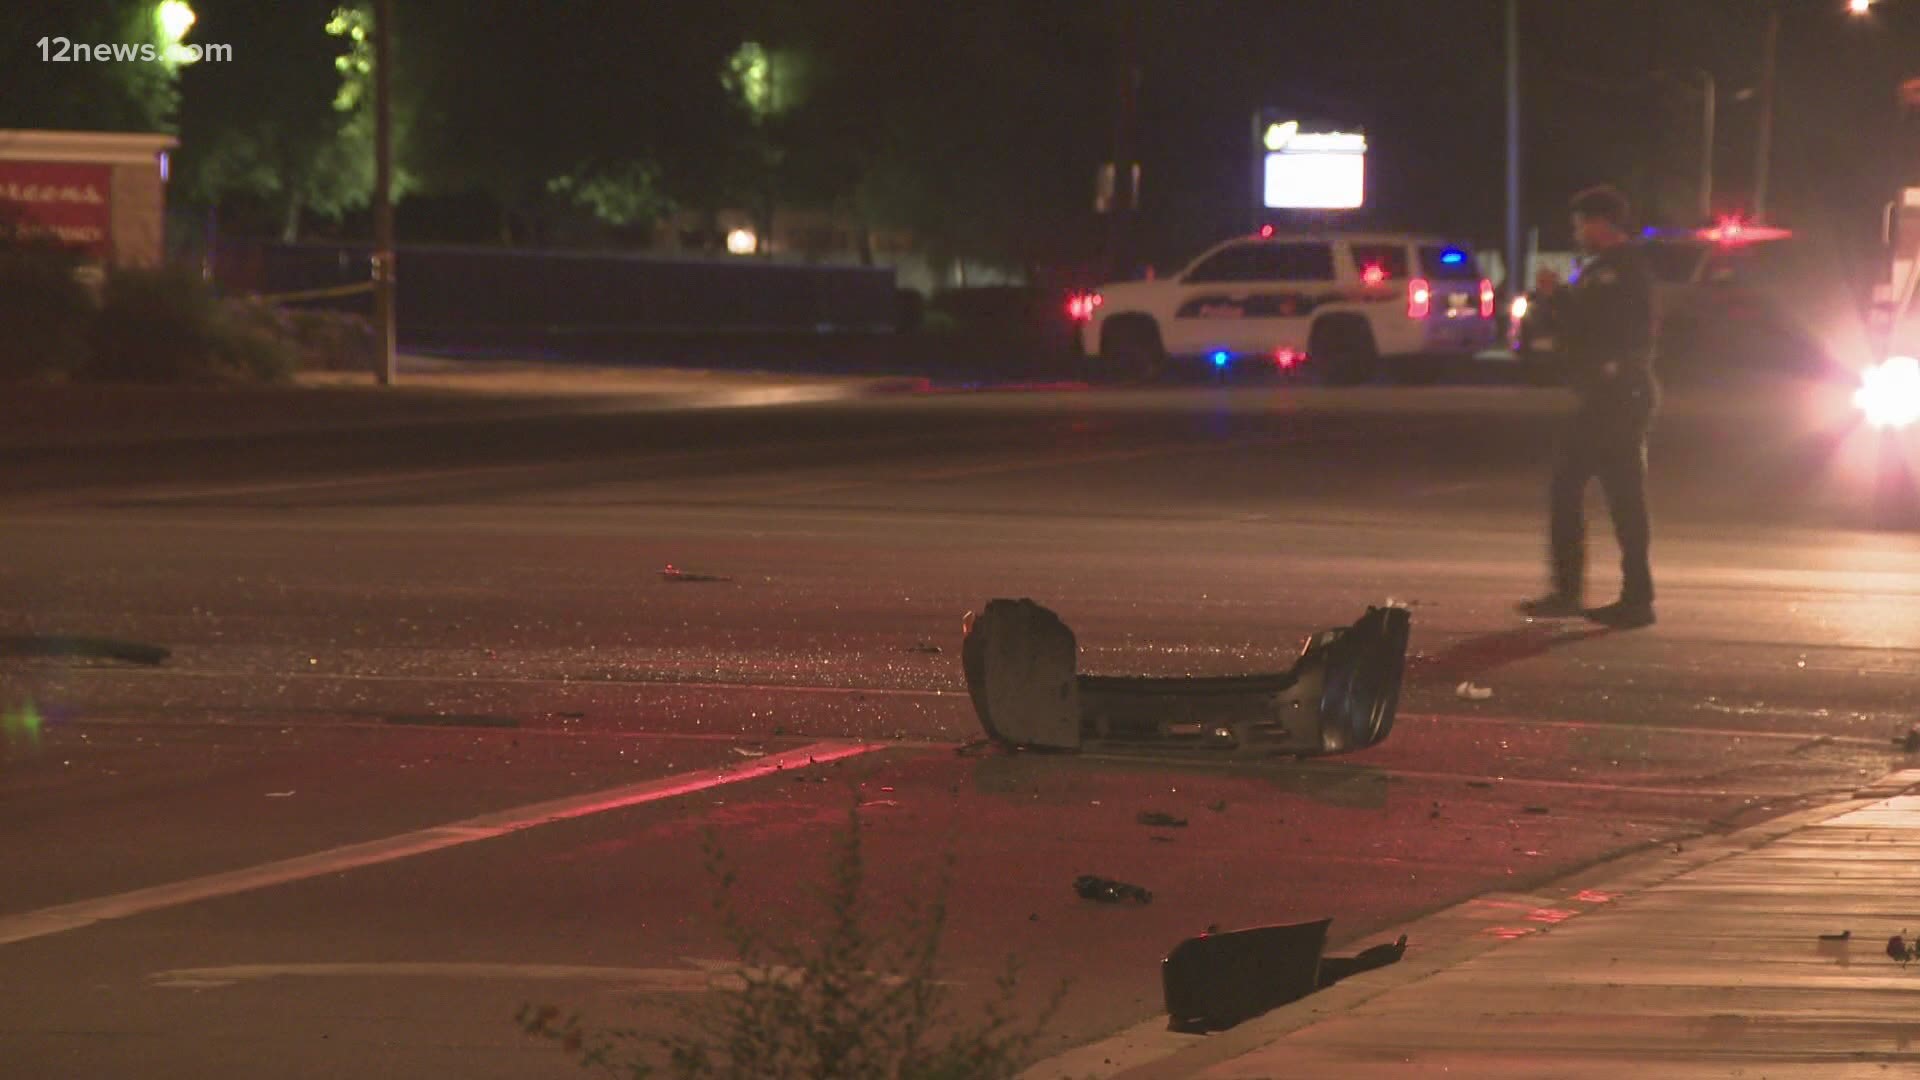 Phoenix PD said witness statements indicate two vehicles were street racing when one crashed into a Jeep making a left turn. The driver of the Jeep was killed.